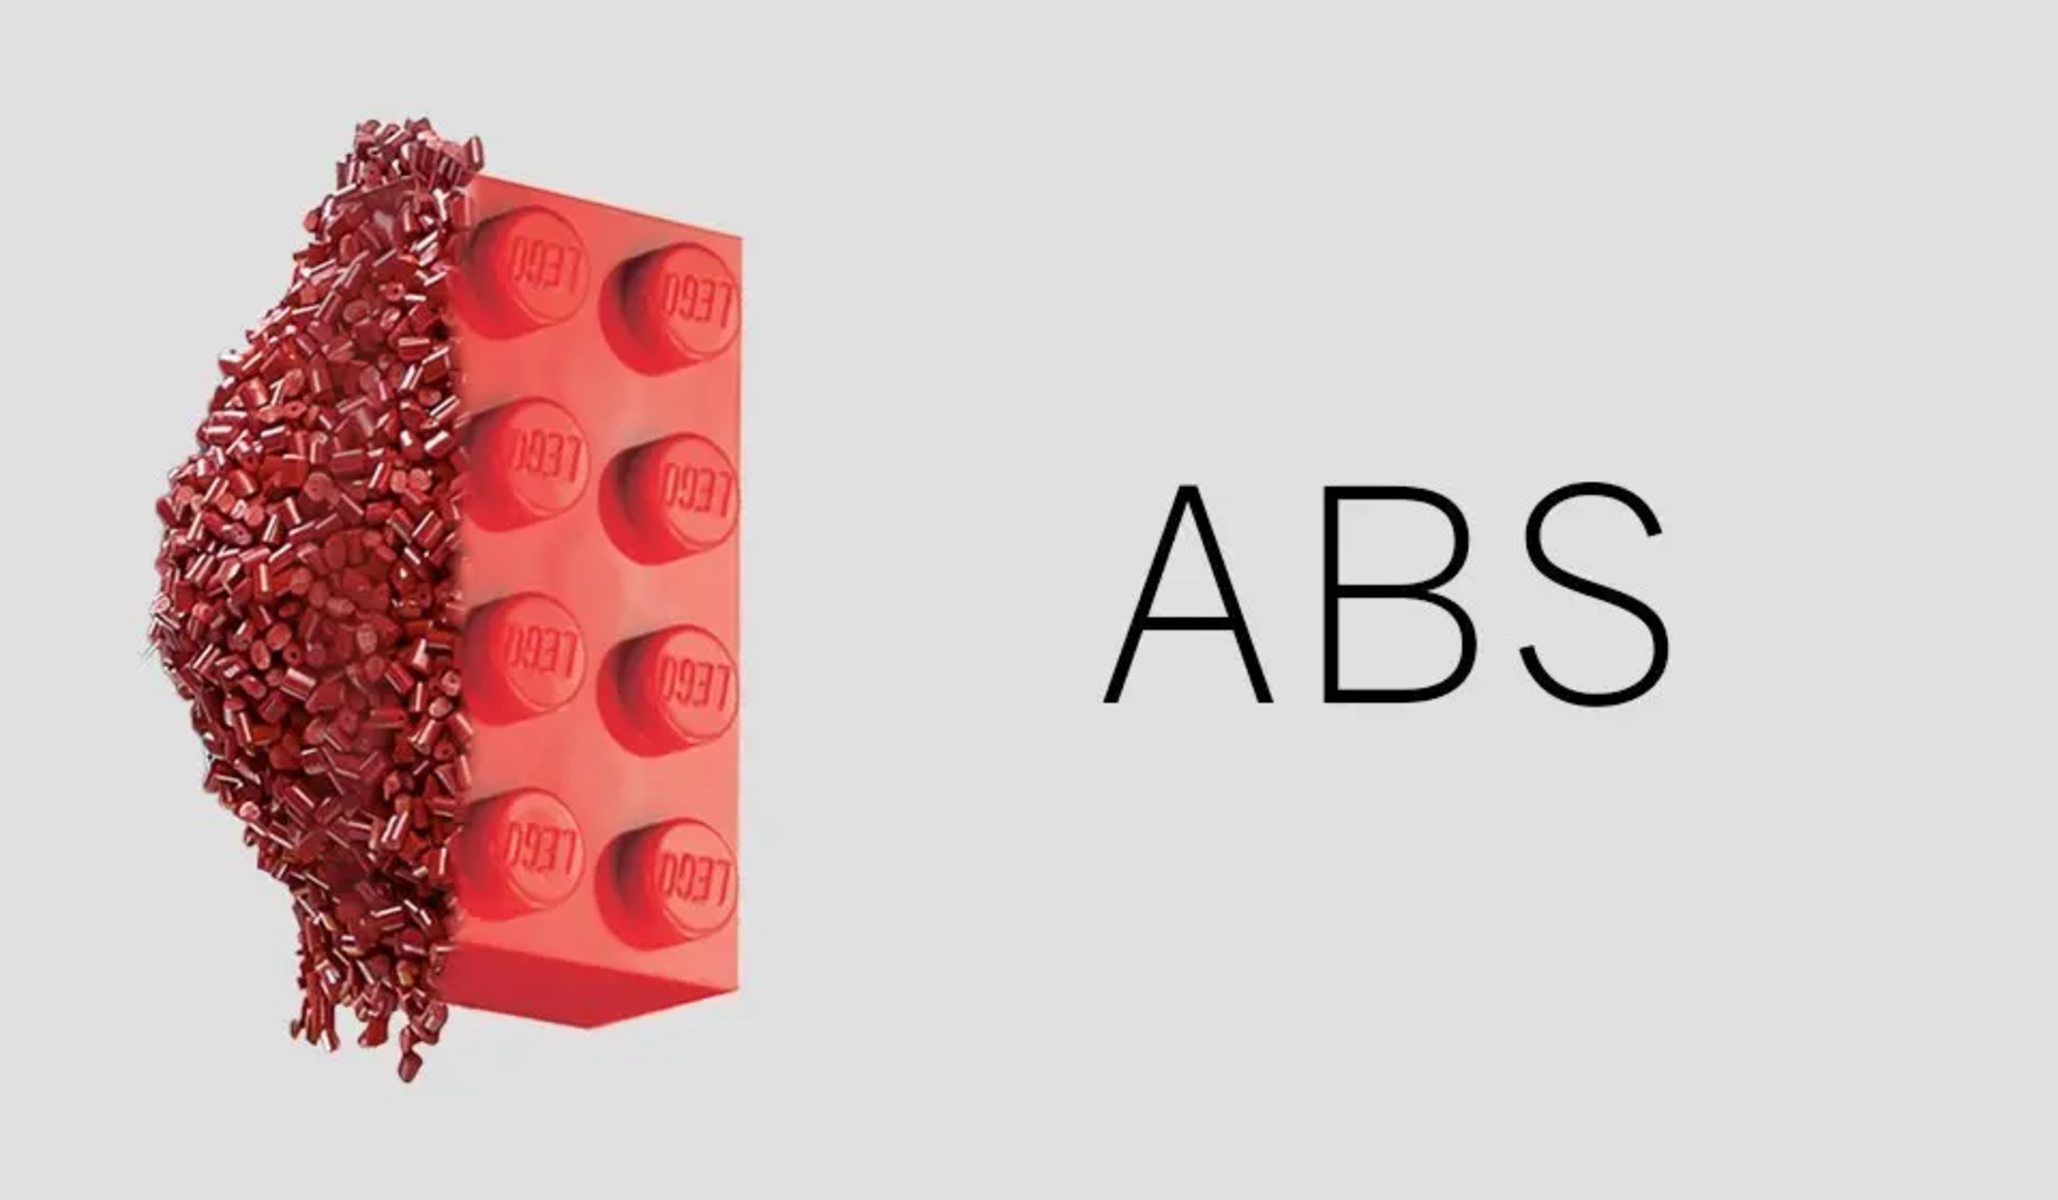 What Is Abs In 3D Printing